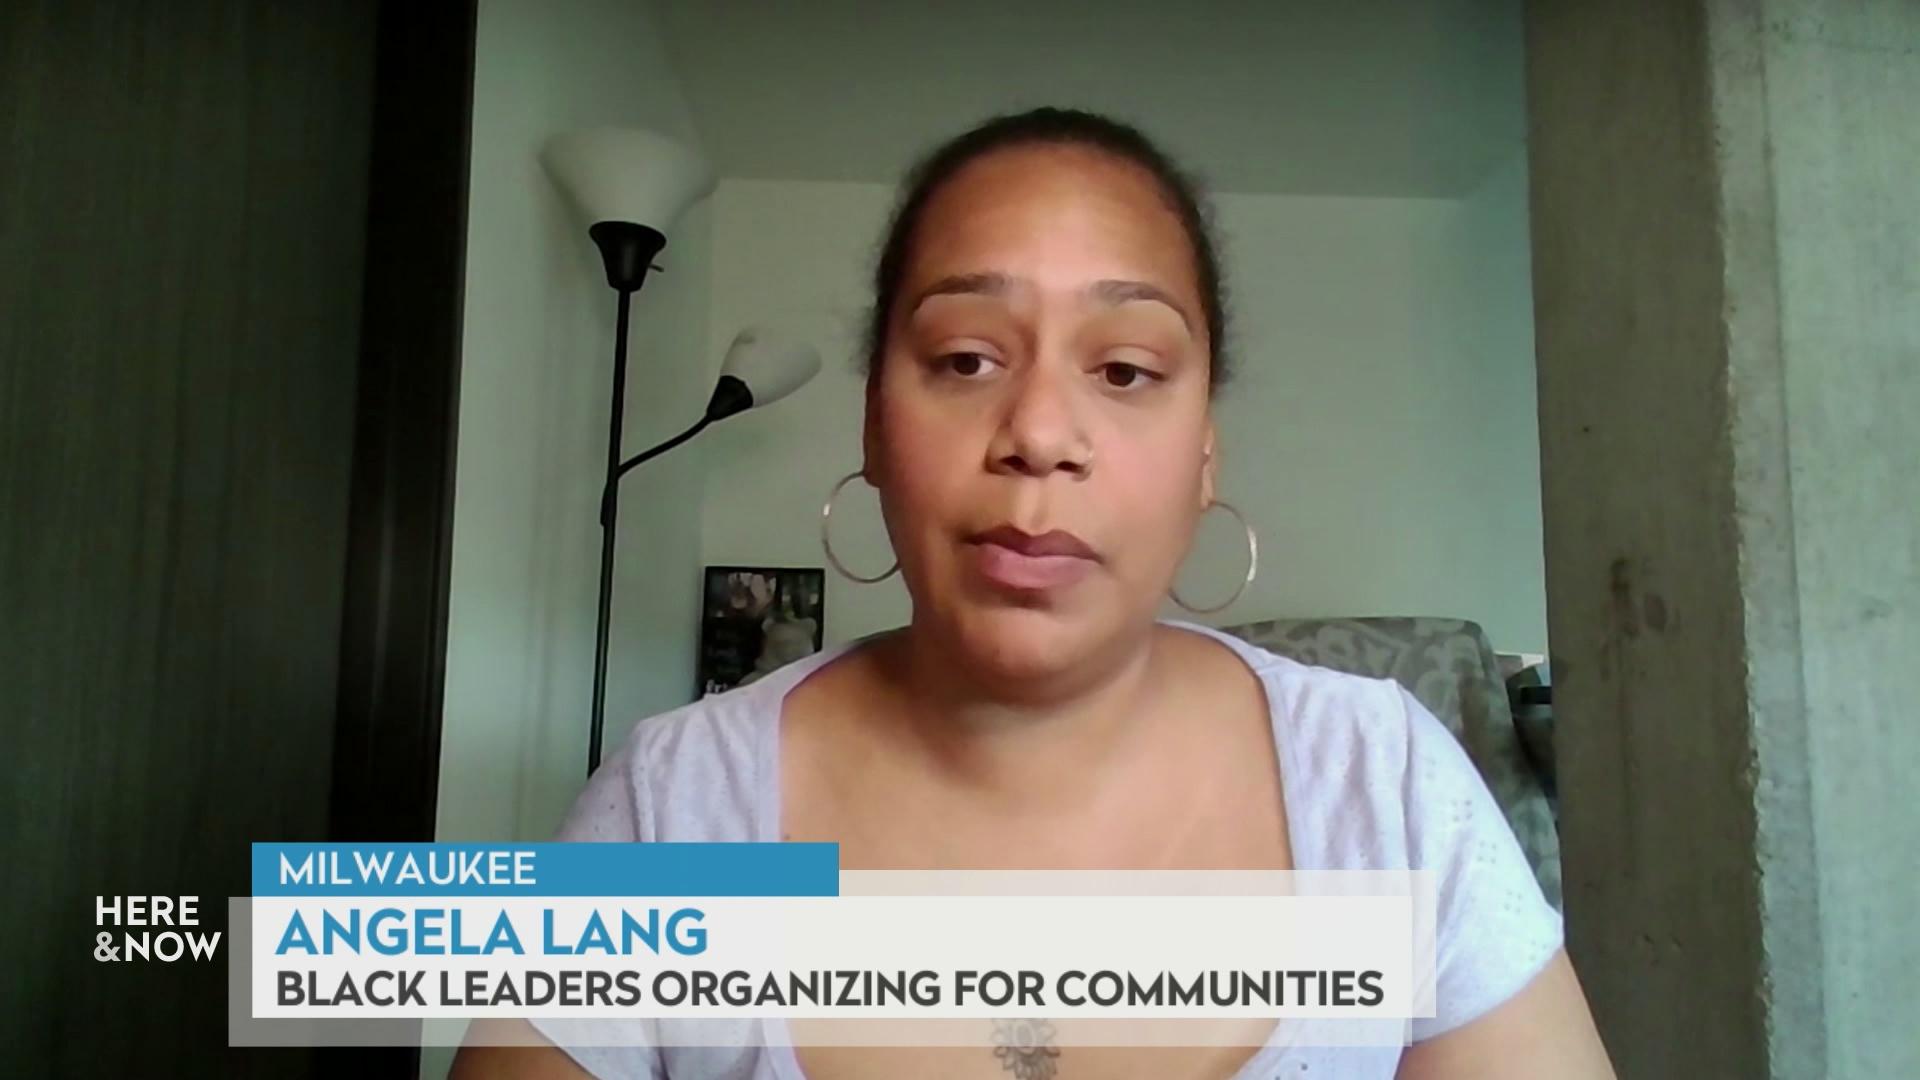 A still image from a video shows Angela Lang seated in front of a lamp with a graphic at bottom reading 'Milwaukee,' 'Angela Lang' and 'Black Leaders Organizing for Communities.'